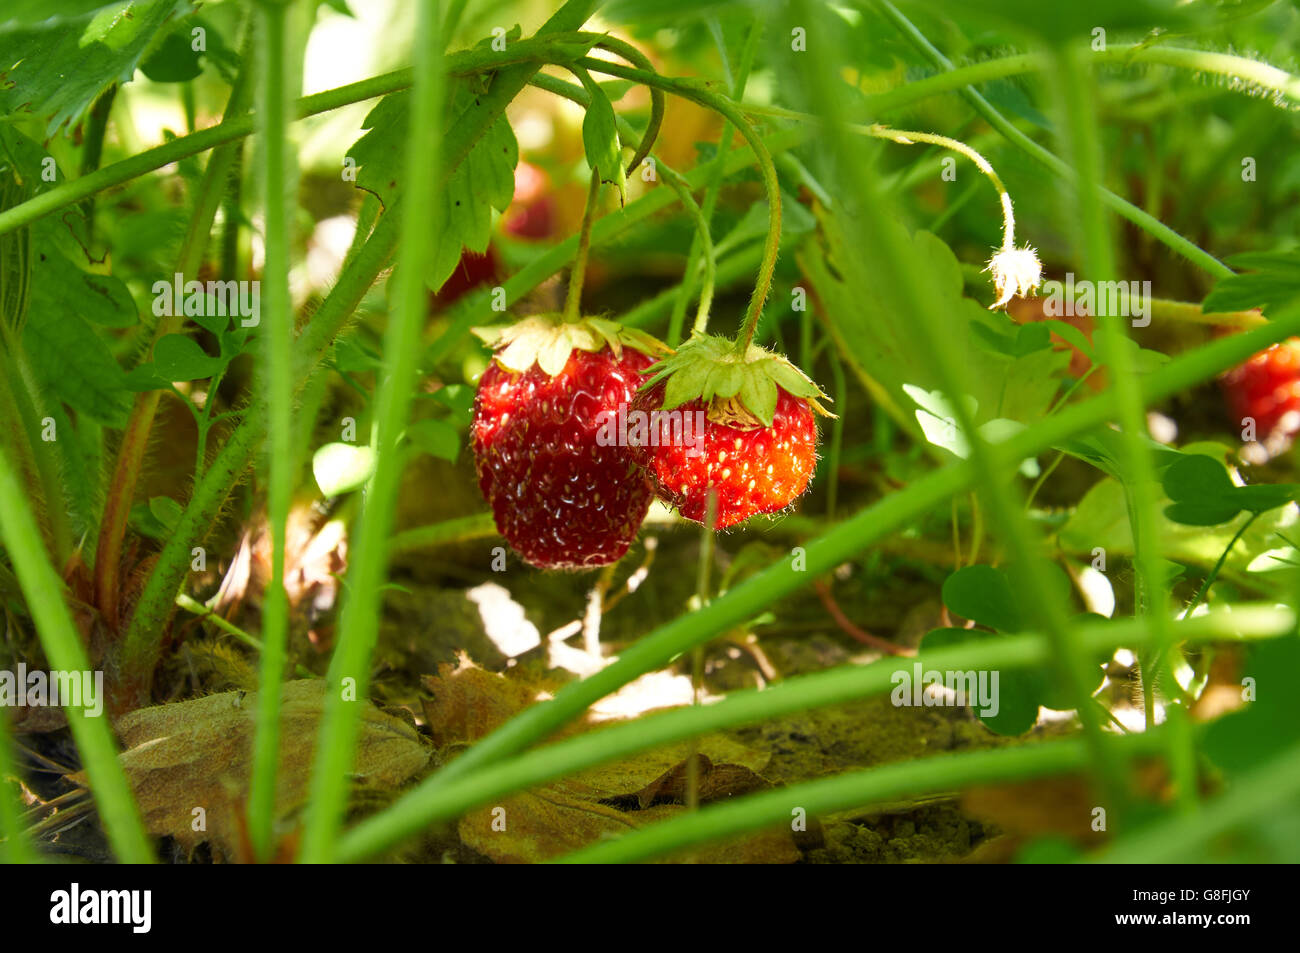 Close up photo of strawberries in evening light Stock Photo